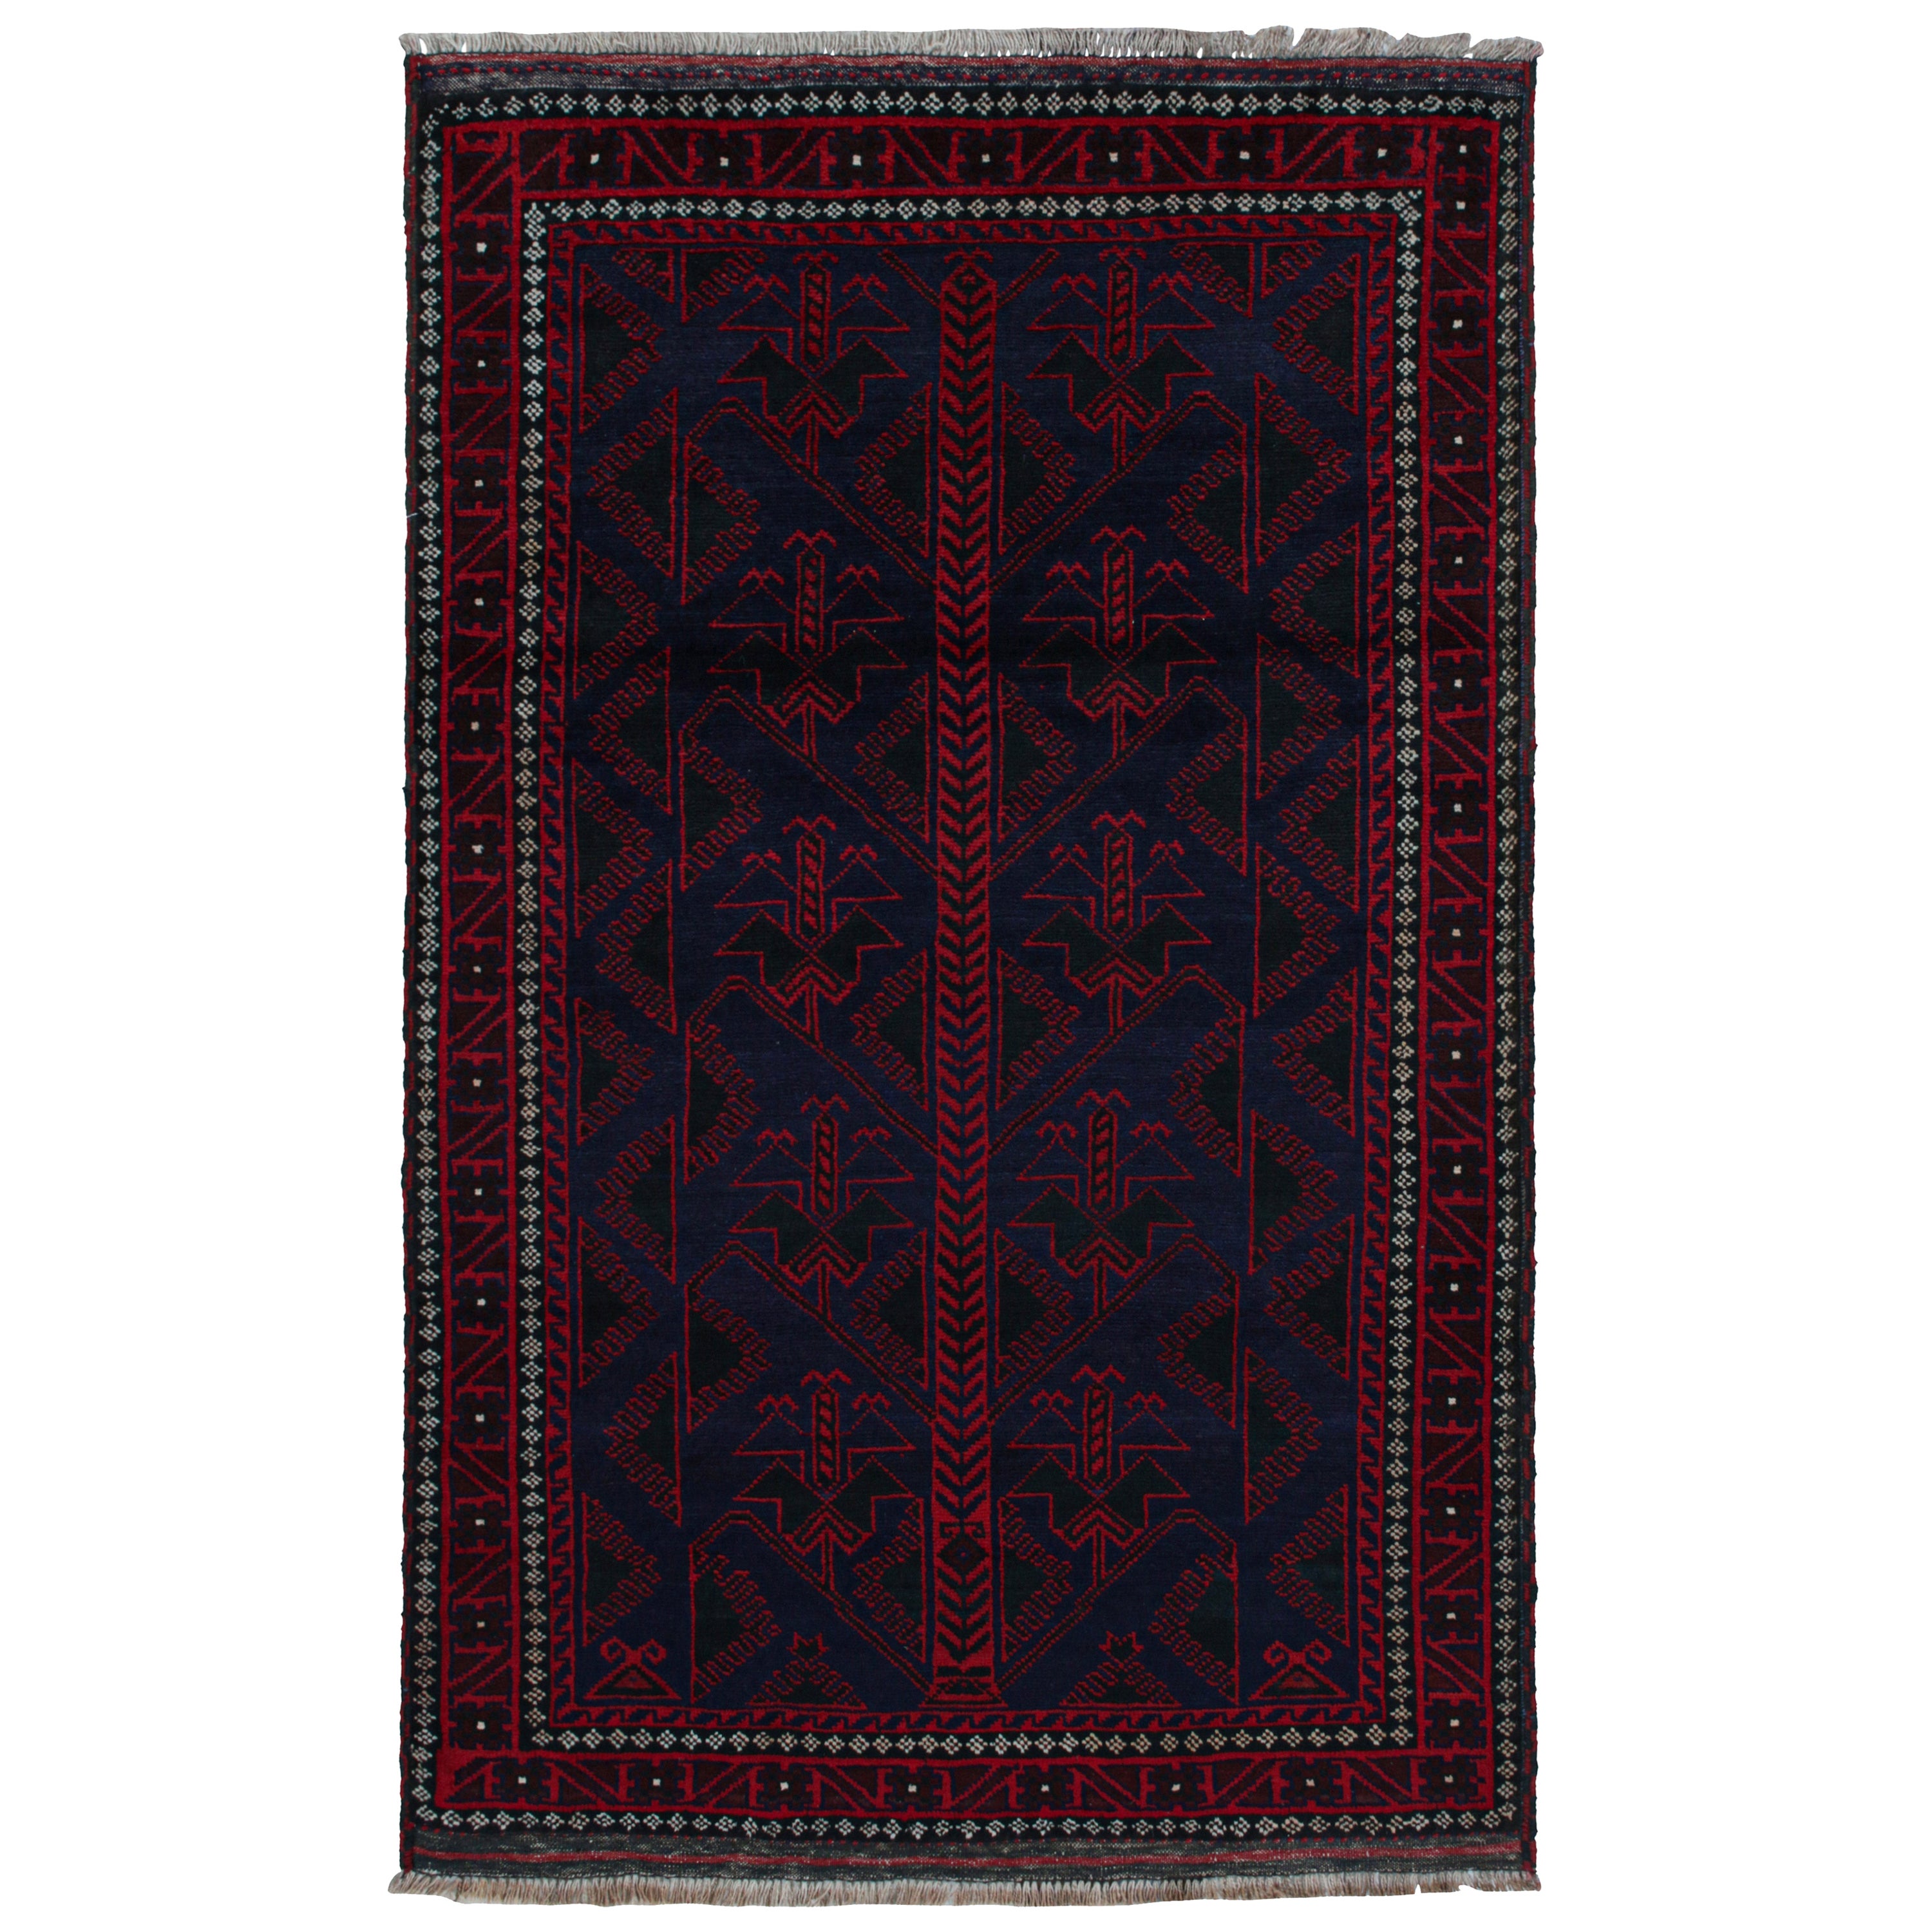 Vintage Baluch Tribal Rug in Blue with Red Geometric Patterns, from Rug & Kilim 